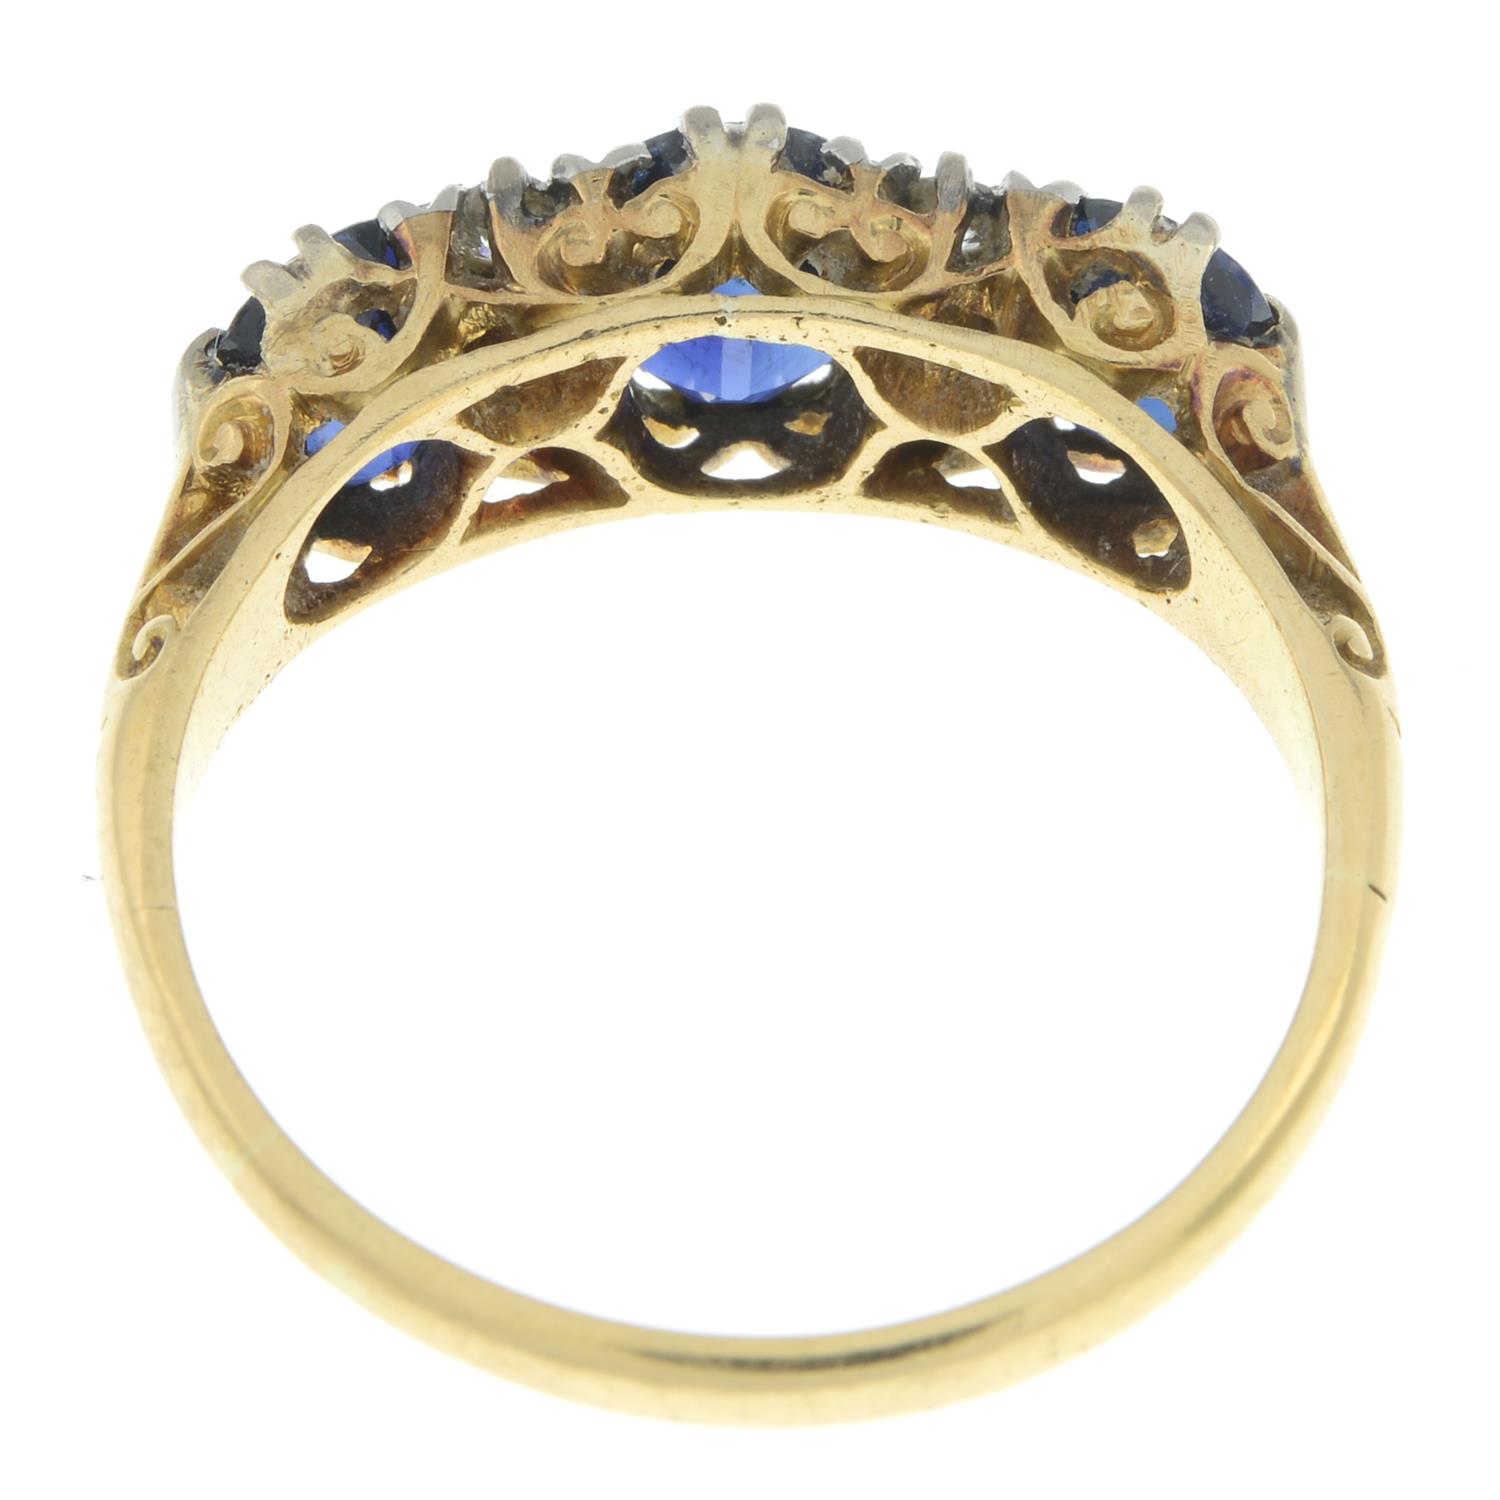 Early 20th century 18ct gold sapphire and diamond ring - Image 3 of 5